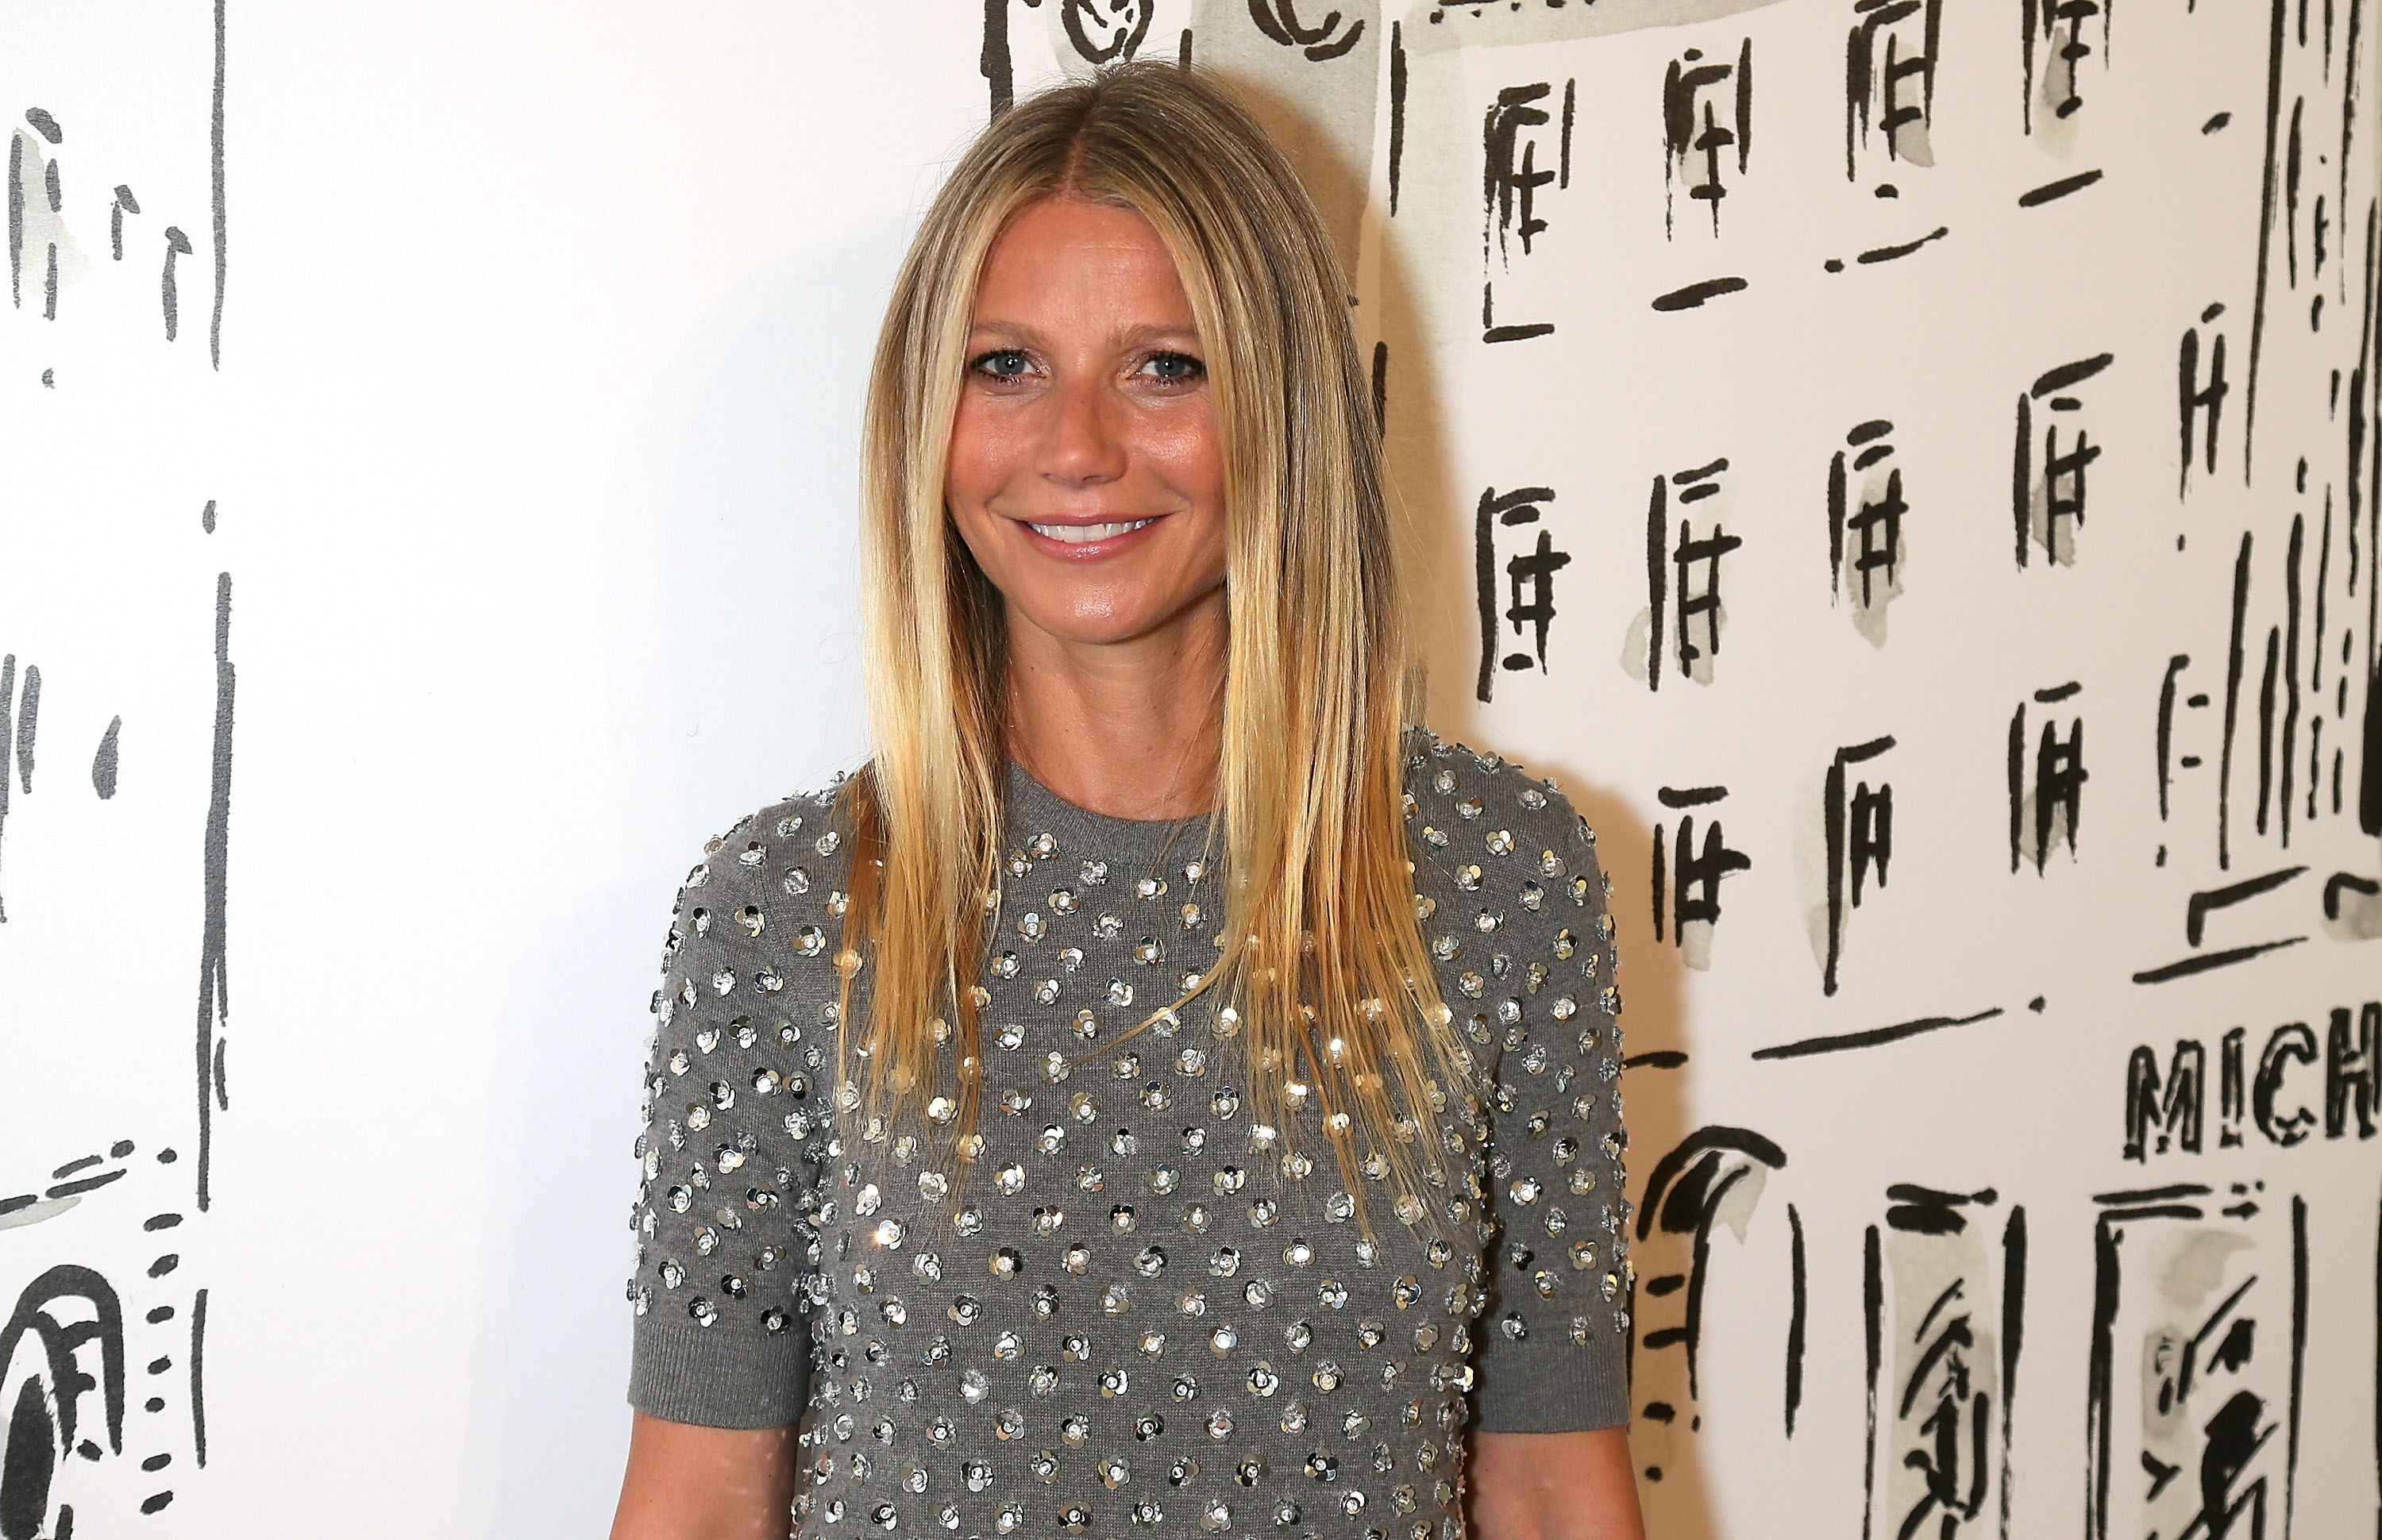 Gwyneth Paltrow attends a cocktail party hosted by Michael Kors in celebration of their new Regent Street Flagship Store opening, at the Michael Kors Flagship Store, on June 22, 2016 in London, England. (David M. Benett—Dave Benett/Getty Images for Michael Kors)